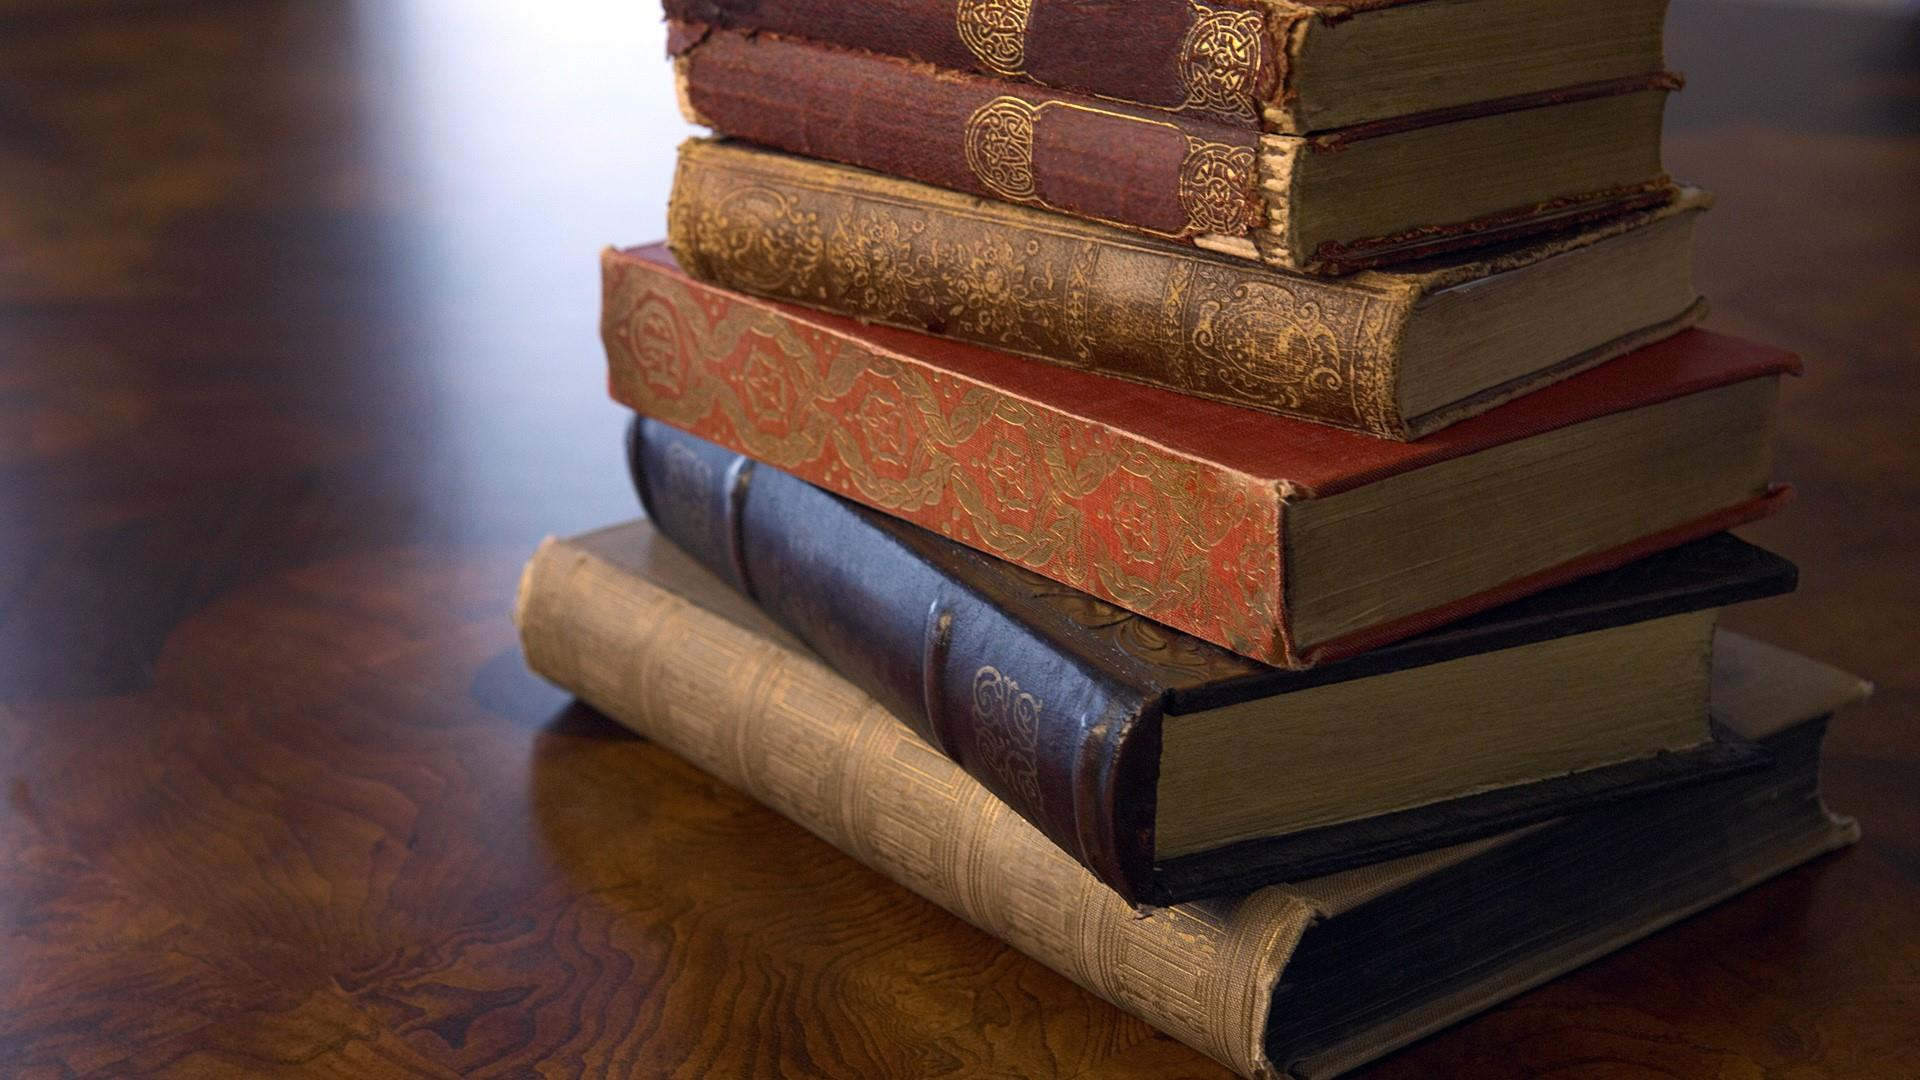 1920x1080 Old books on the table wallpaper backiee